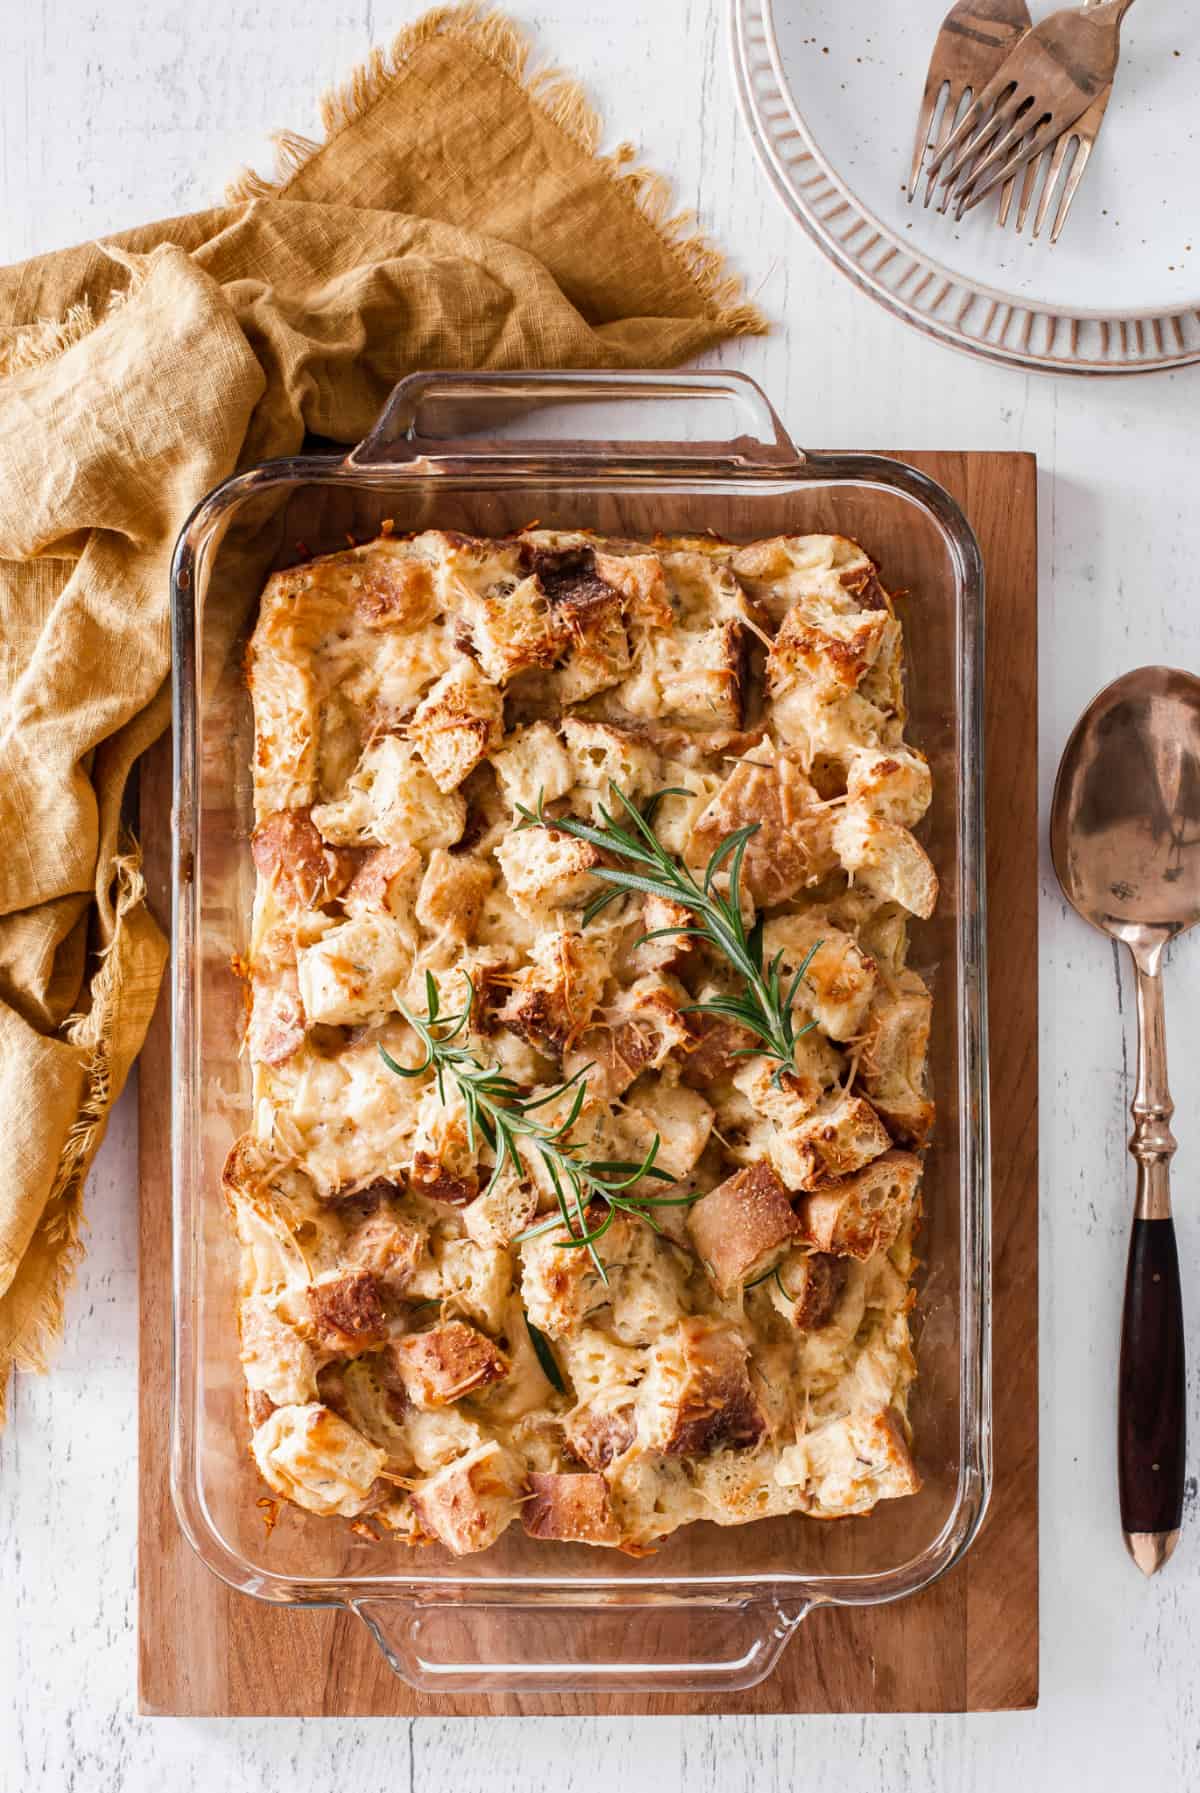 rosemary parmesan bread pudding in glass casserole dish, overhead view